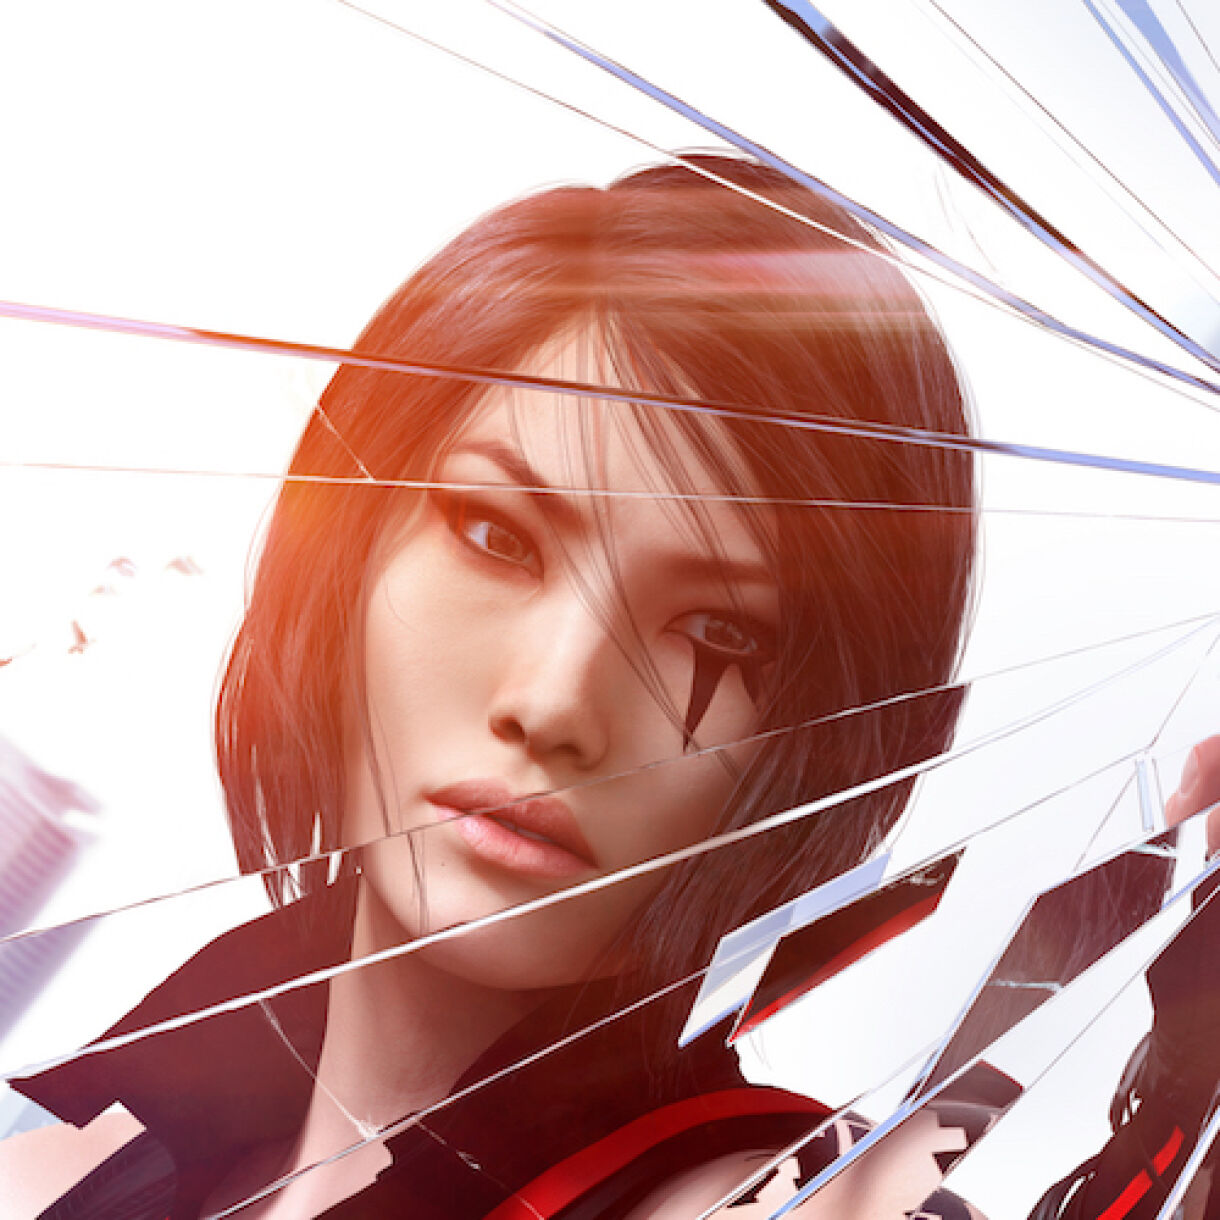 Should future Mirror's Edge games keep Faith as the main protagonist? I  think her story in both games is complete and the art style and gameplay is  what sells the series, not